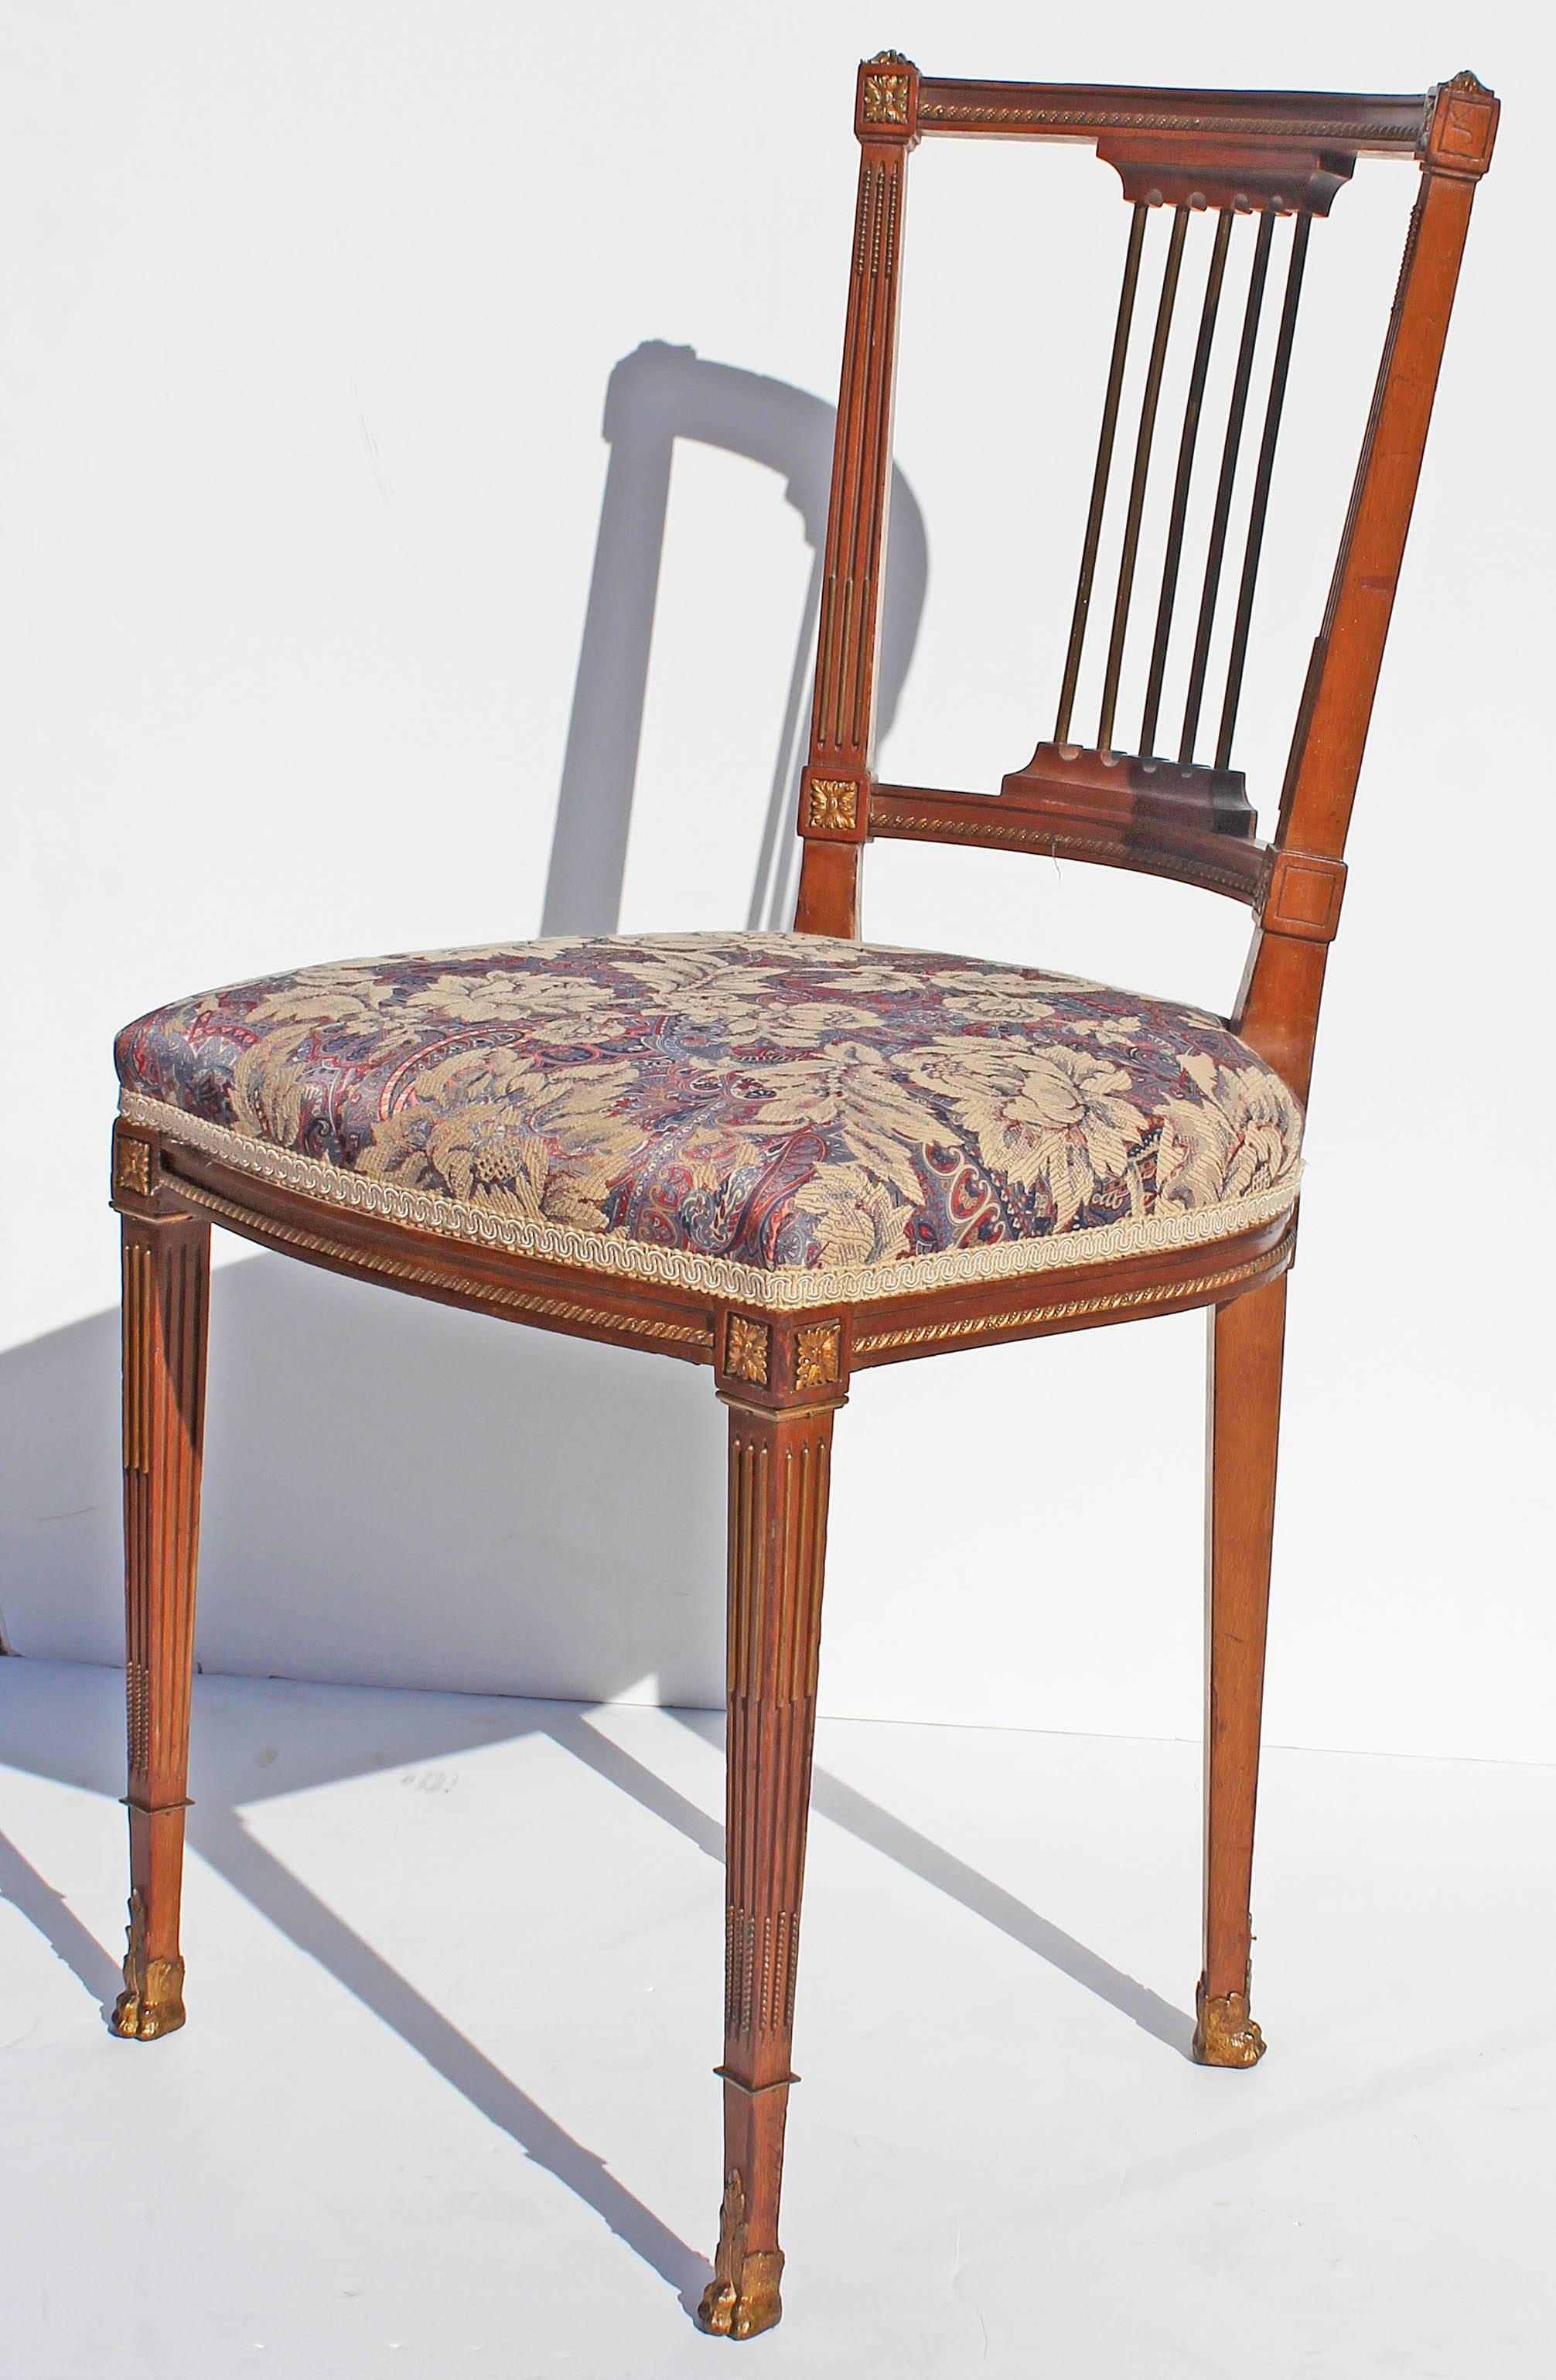 Petite French Louis XVI style boudoir side chair. Fruitwood with gilt mounts, late 19th century. See matching chair LU158525362273.